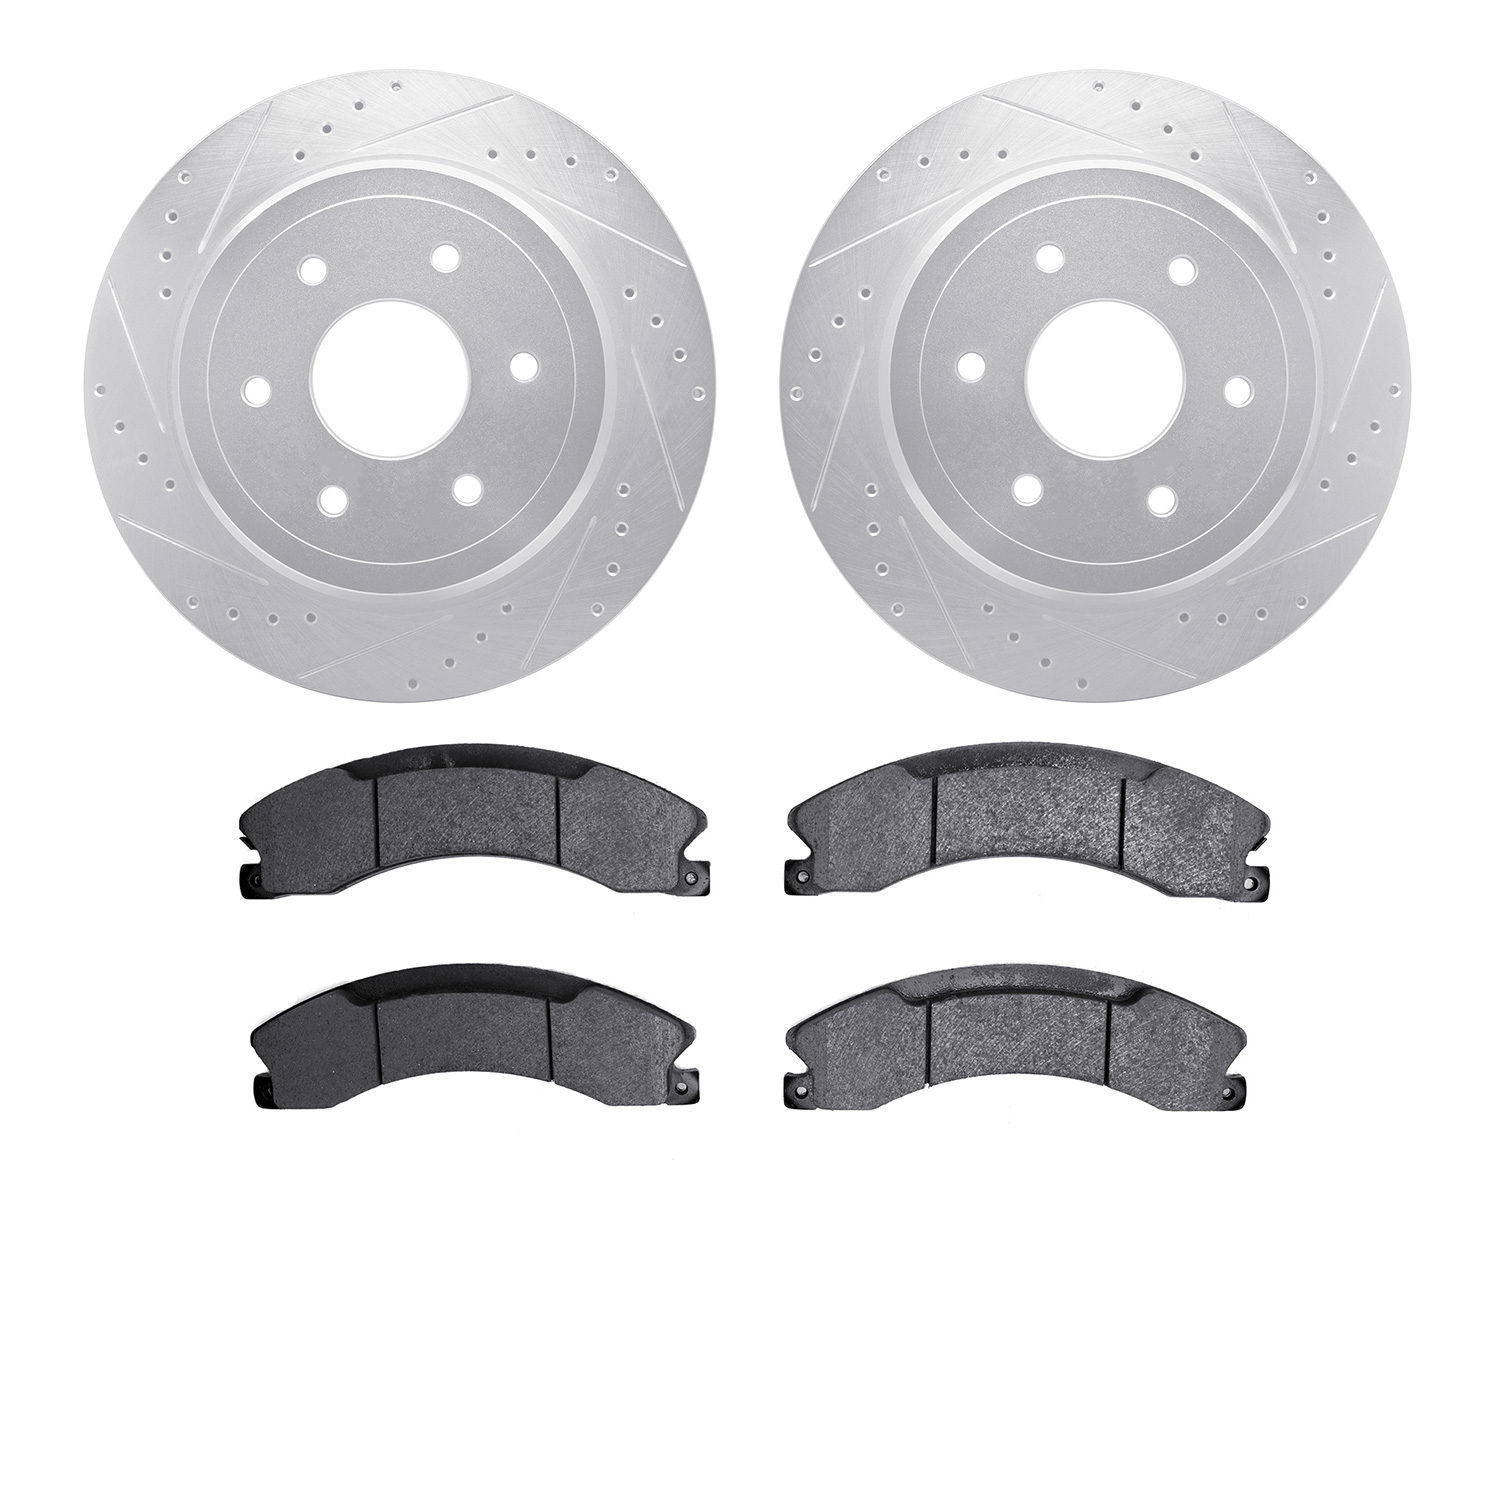 7502-67123 Drilled/Slotted Brake Rotors w/5000 Advanced Brake Pads Kit [Silver], Fits Select Infiniti/Nissan, Position: Rear